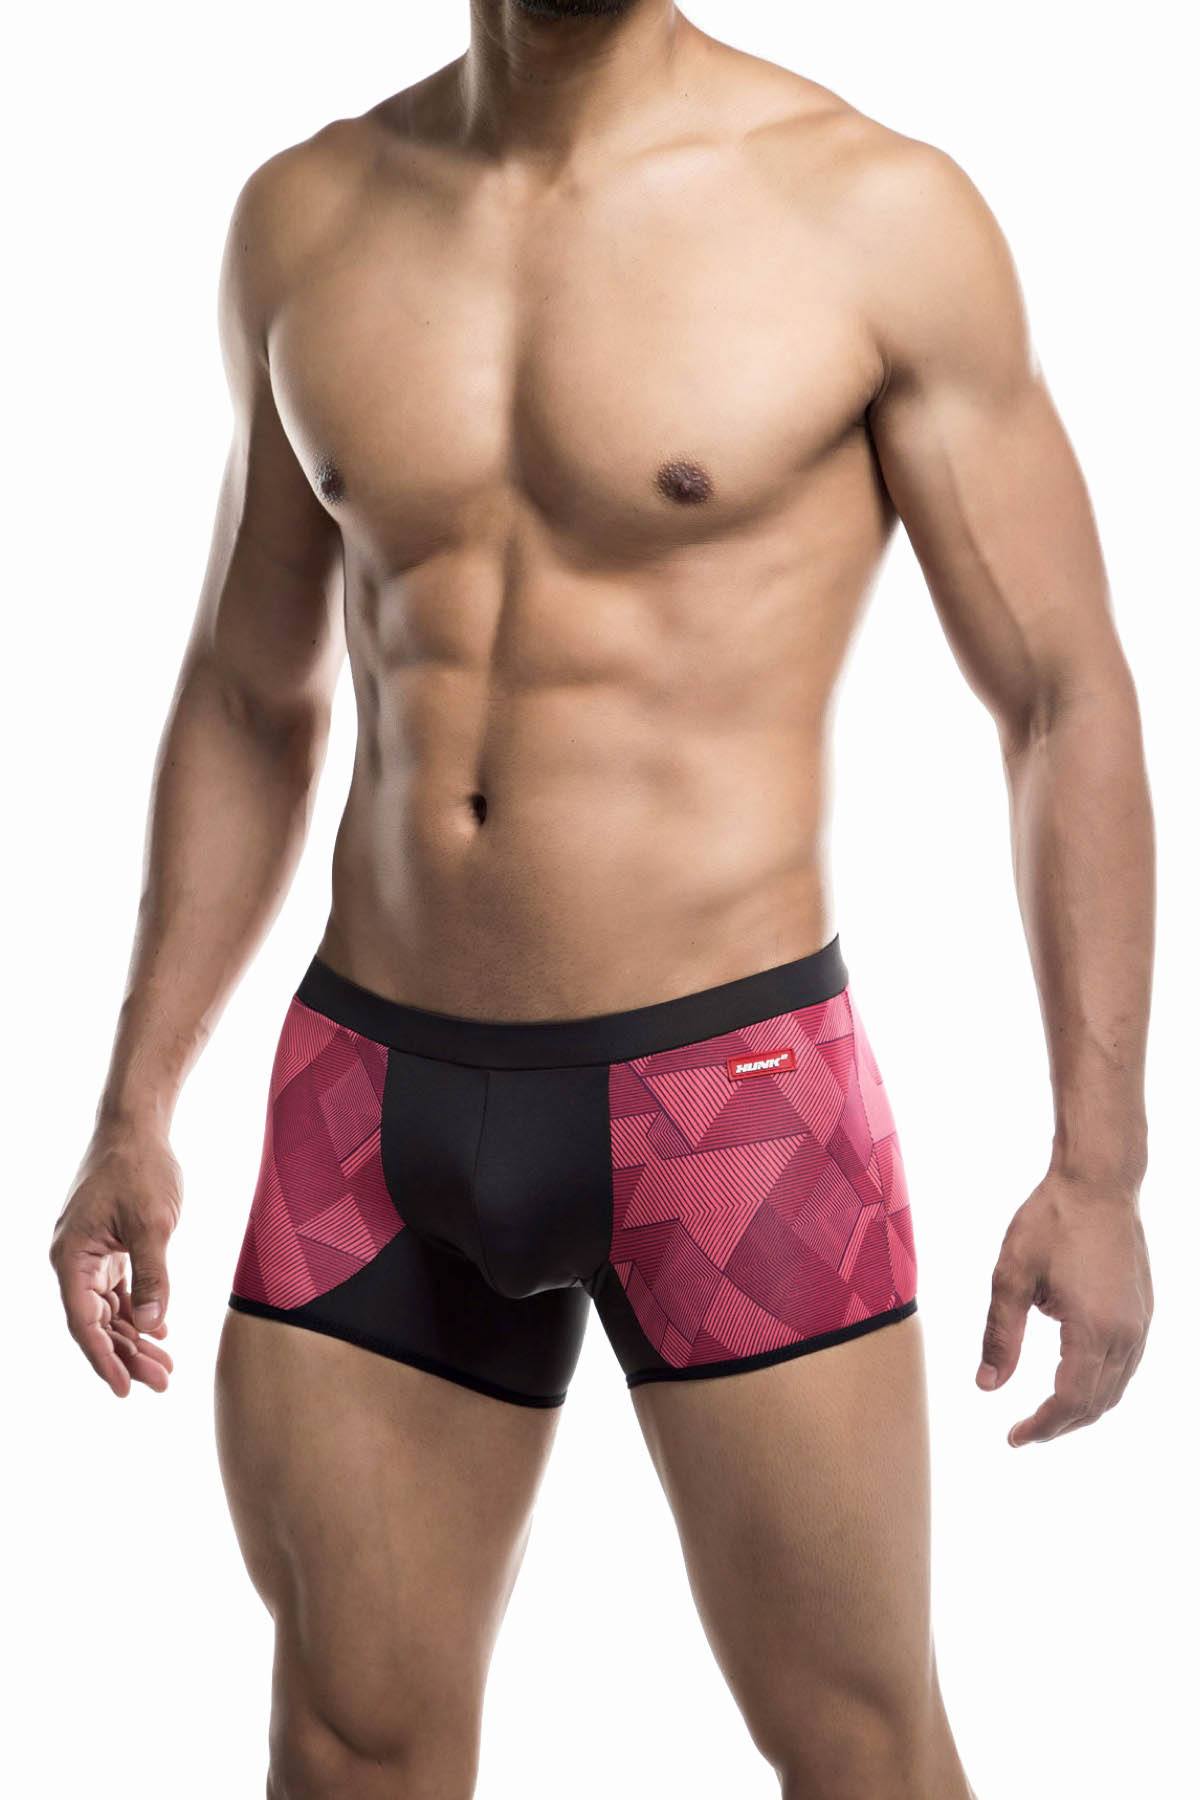 Hunk² Indian-Red Apollo Mure² Boxer Trunk